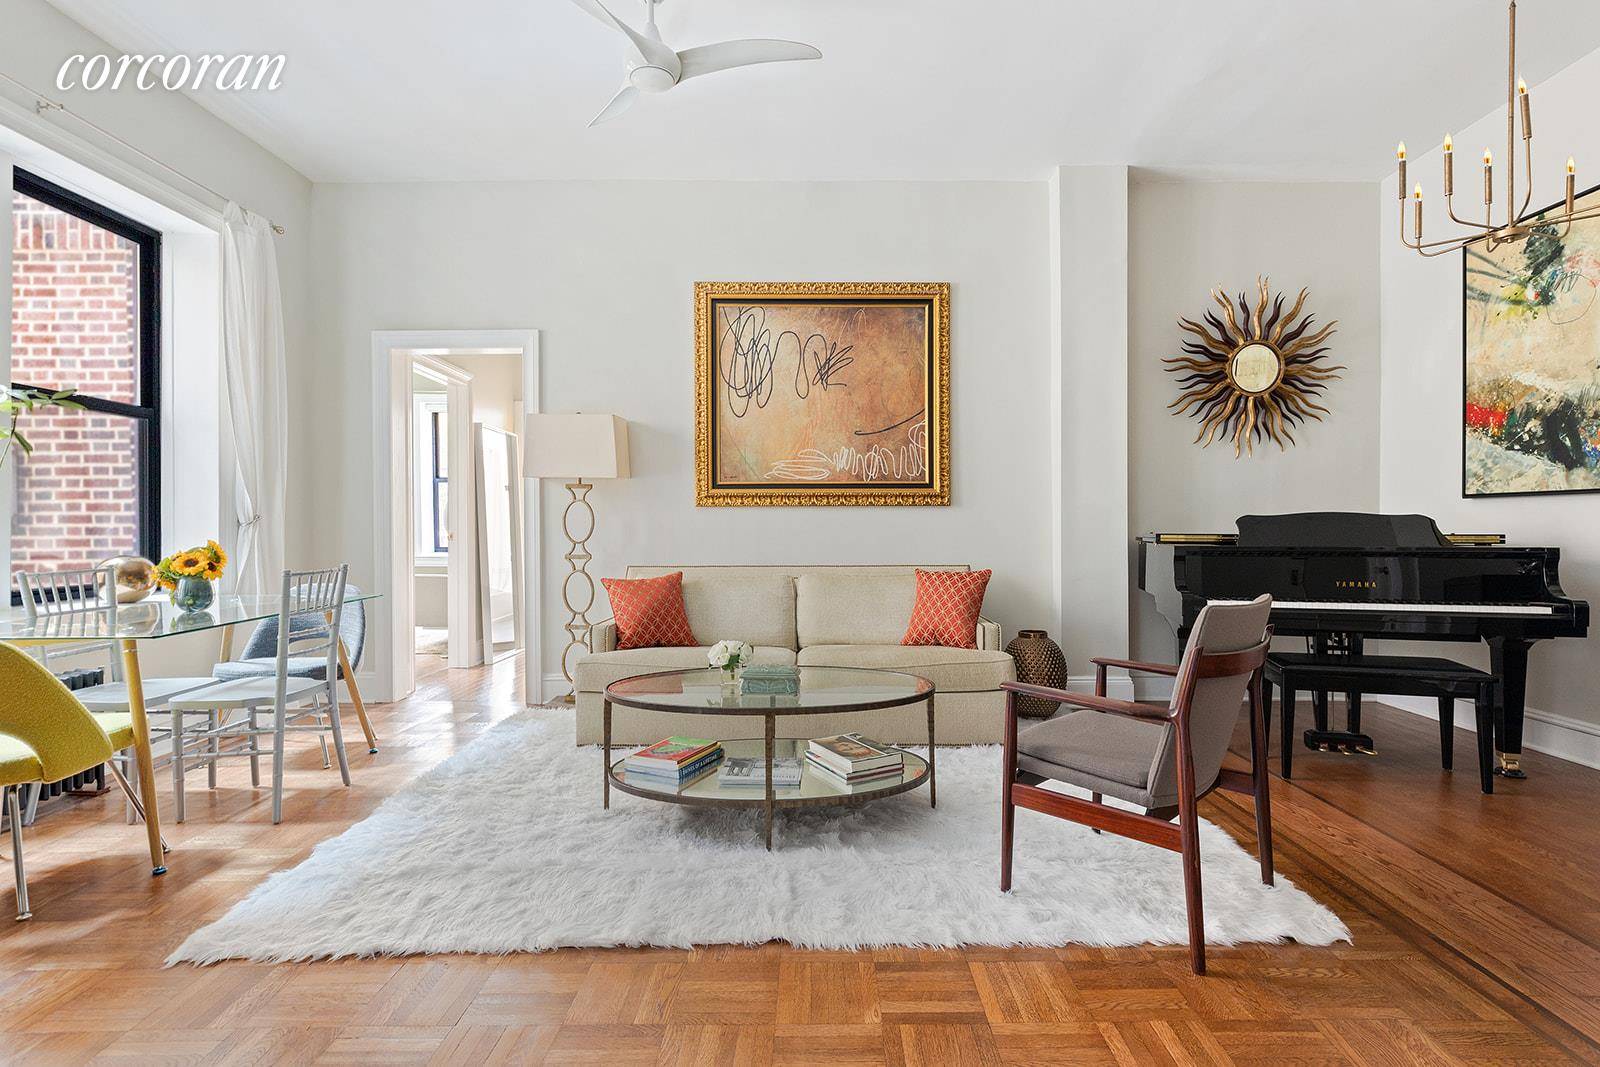 LOFTY PREWAR CONDO ! This light and lovely home was masterfully renovated to create an open, airy, thoroughly modern space, while still preserving its prewar charm.